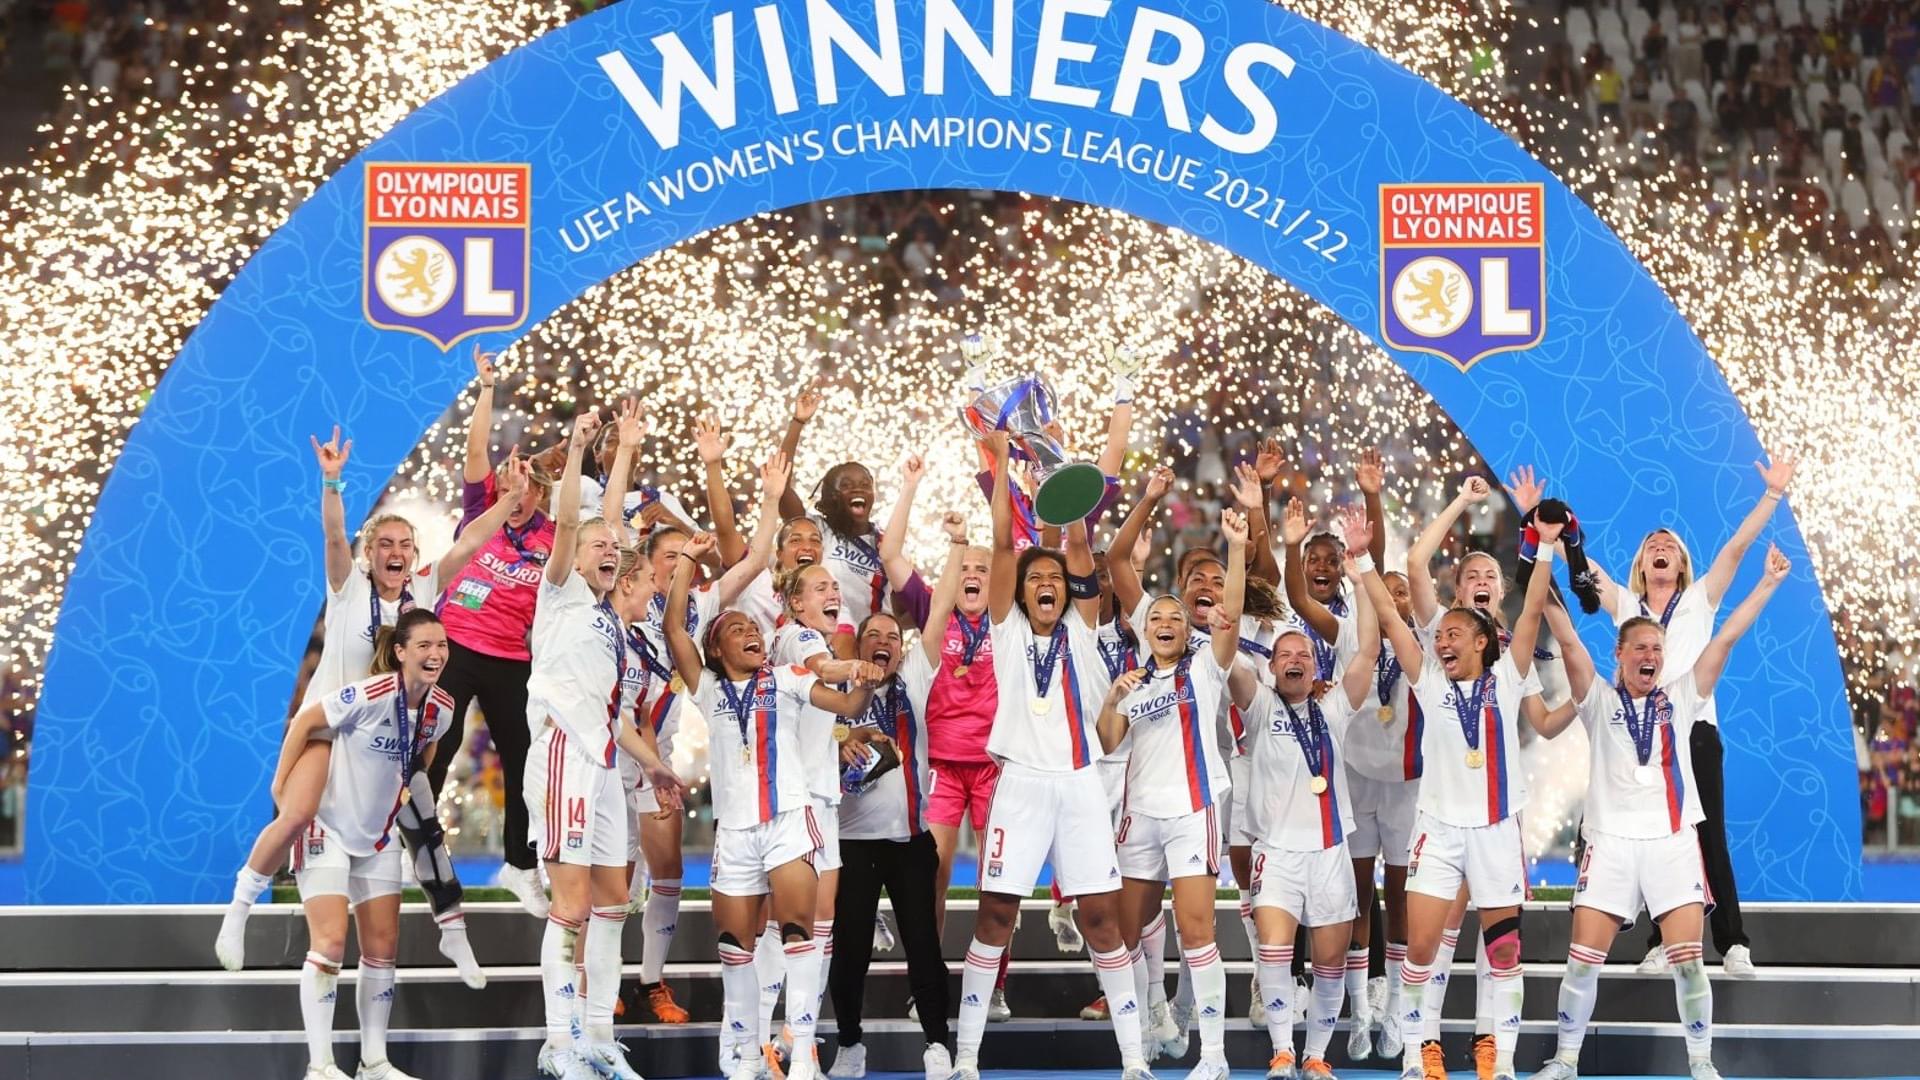 Lyon team is celebrating a victory in Champions League